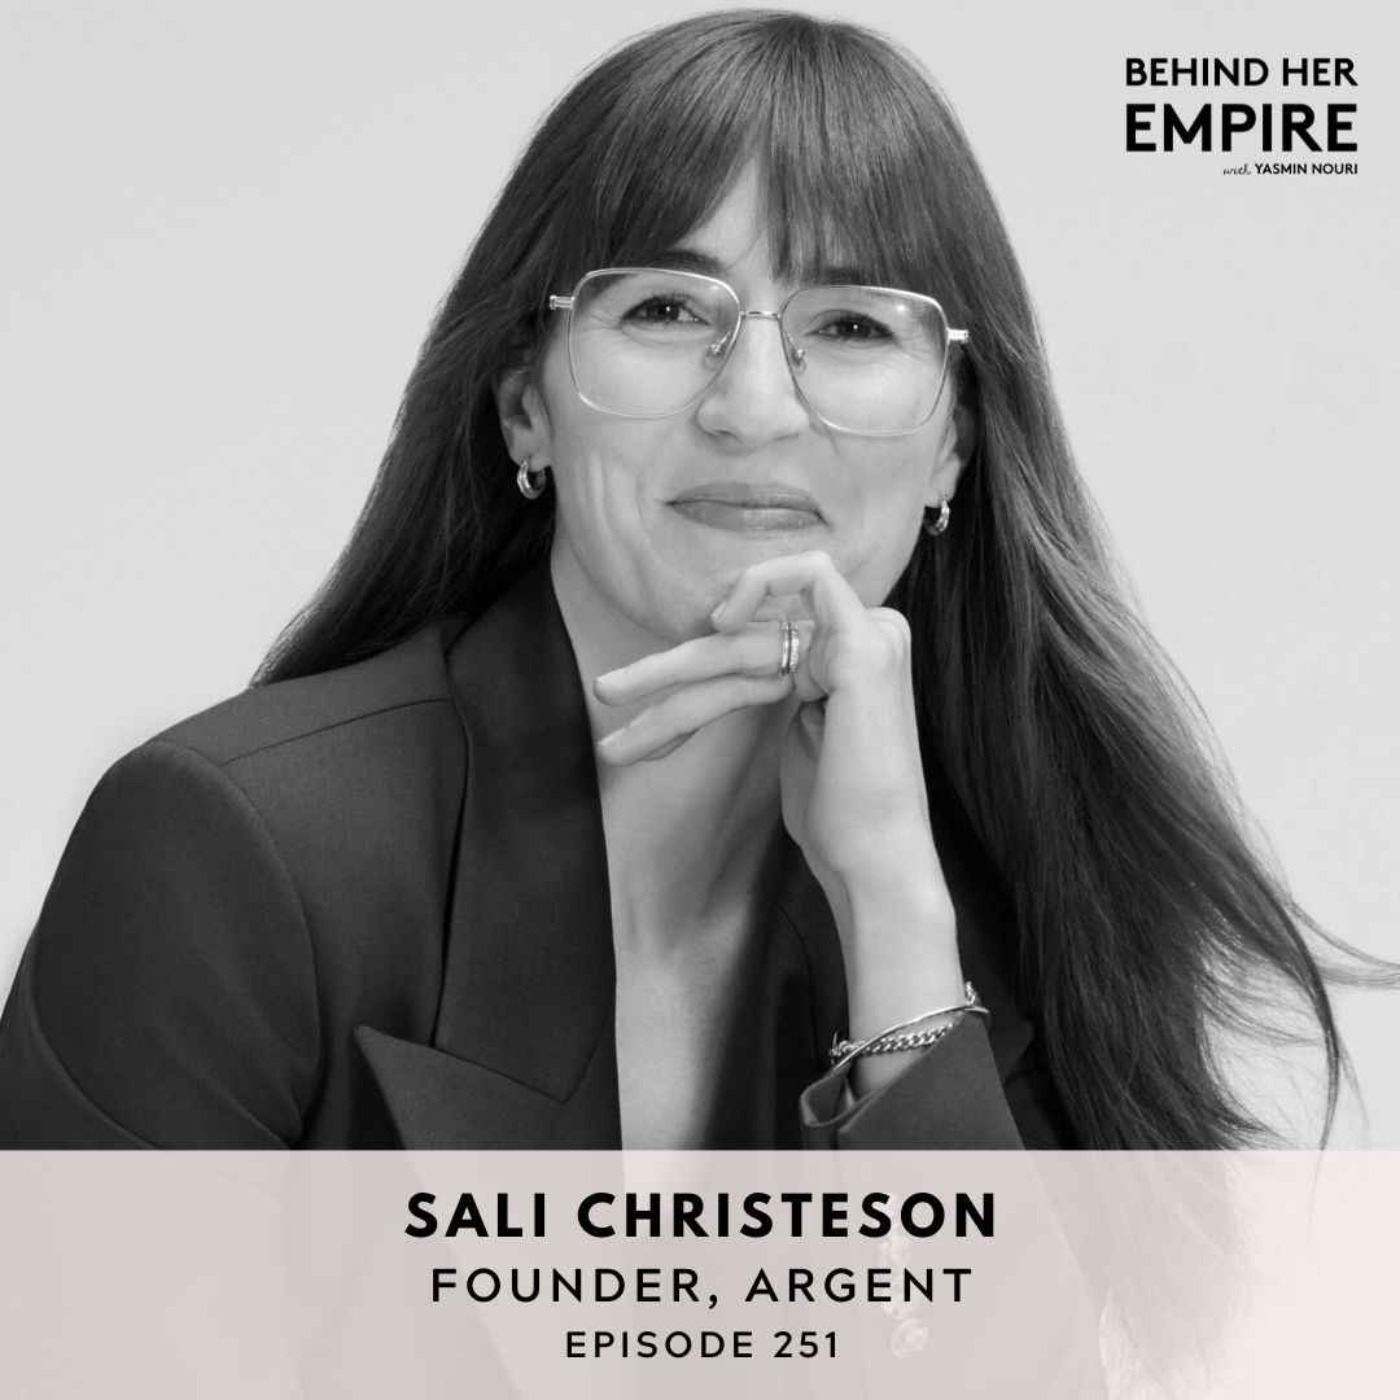 How This Founder Used Her Corporate Experience to Disrupt the Fashion Industry and Is Helping Women Become More Confident - Sali Christeson, Founder of Argent